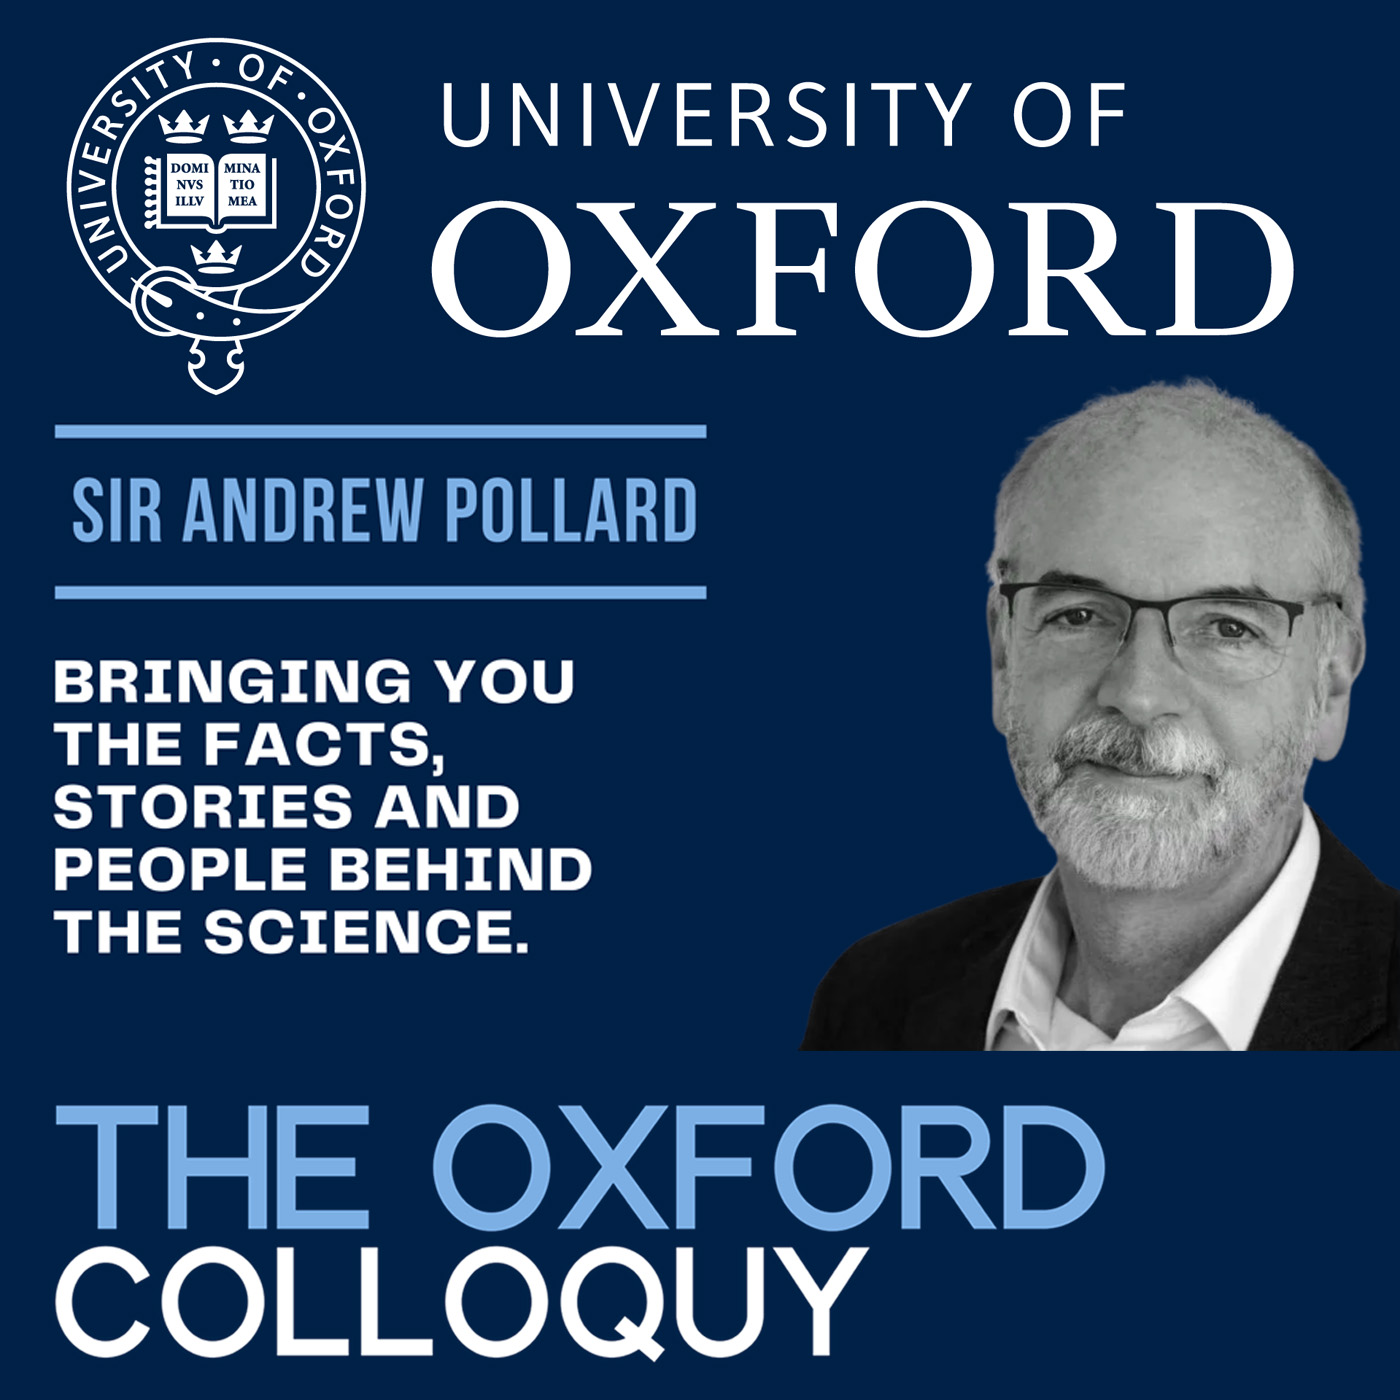 The Oxford Colloquy